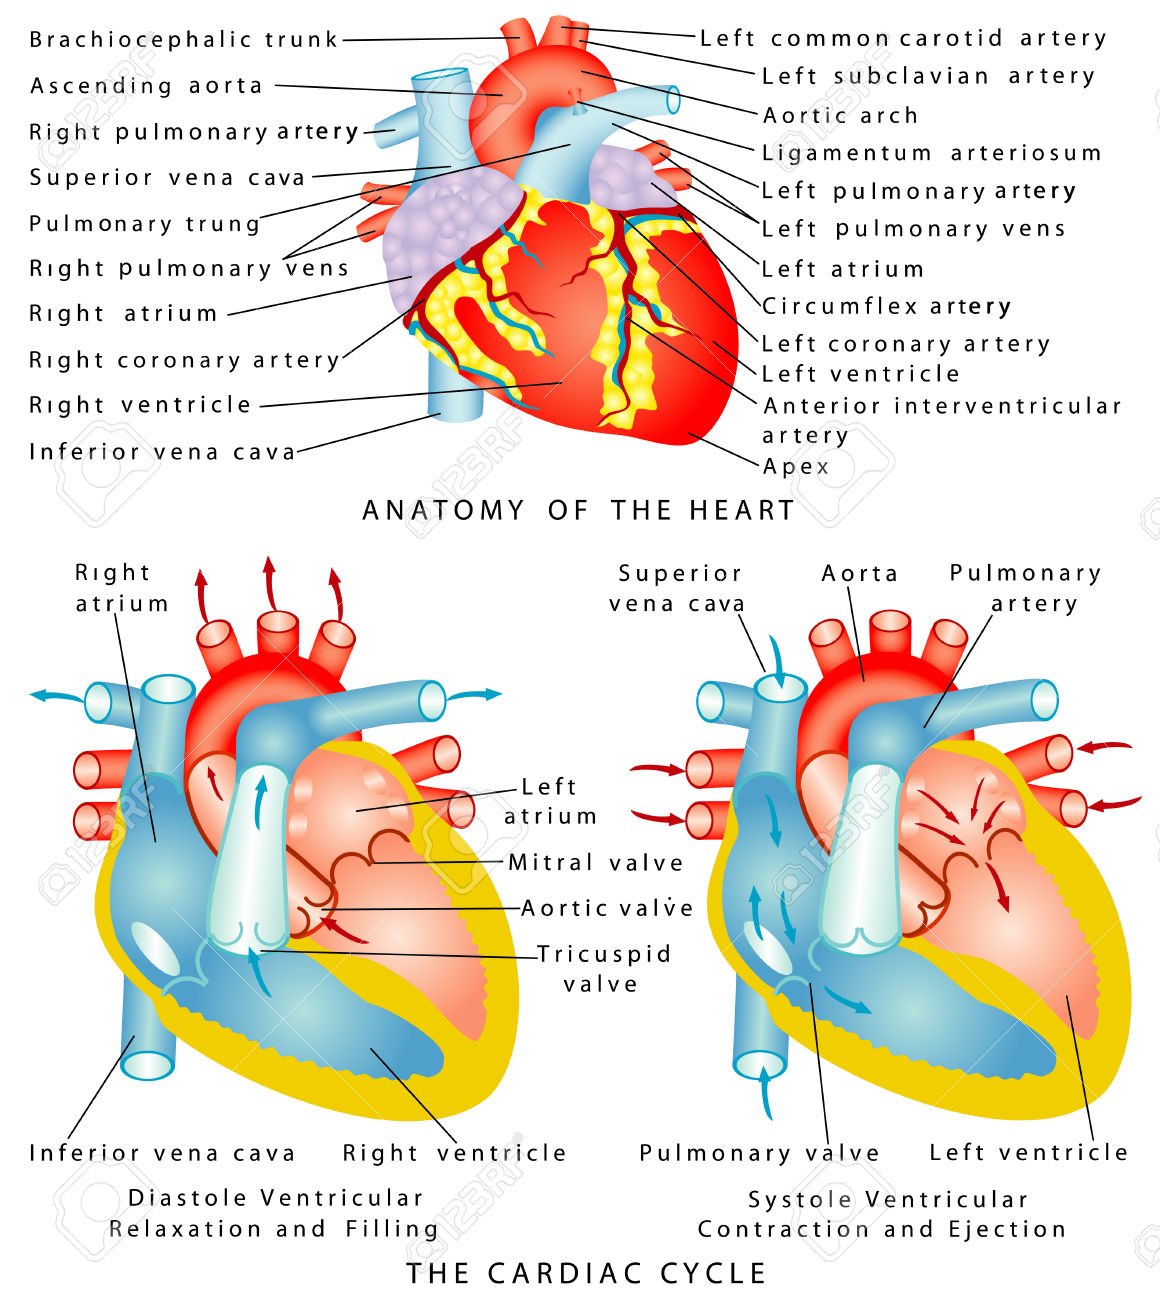 171 Ventricular Stock Illustrations, Cliparts And Royalty Free.